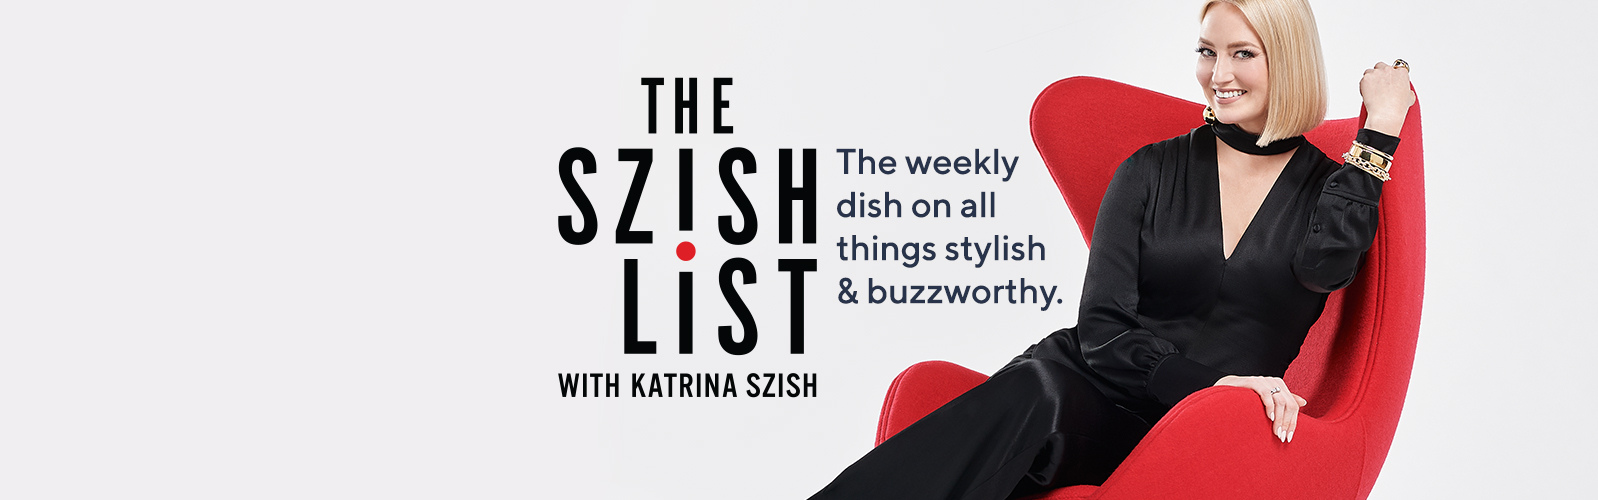 The Szish List.  The weekly dish on all things stylish & buzzworthy.